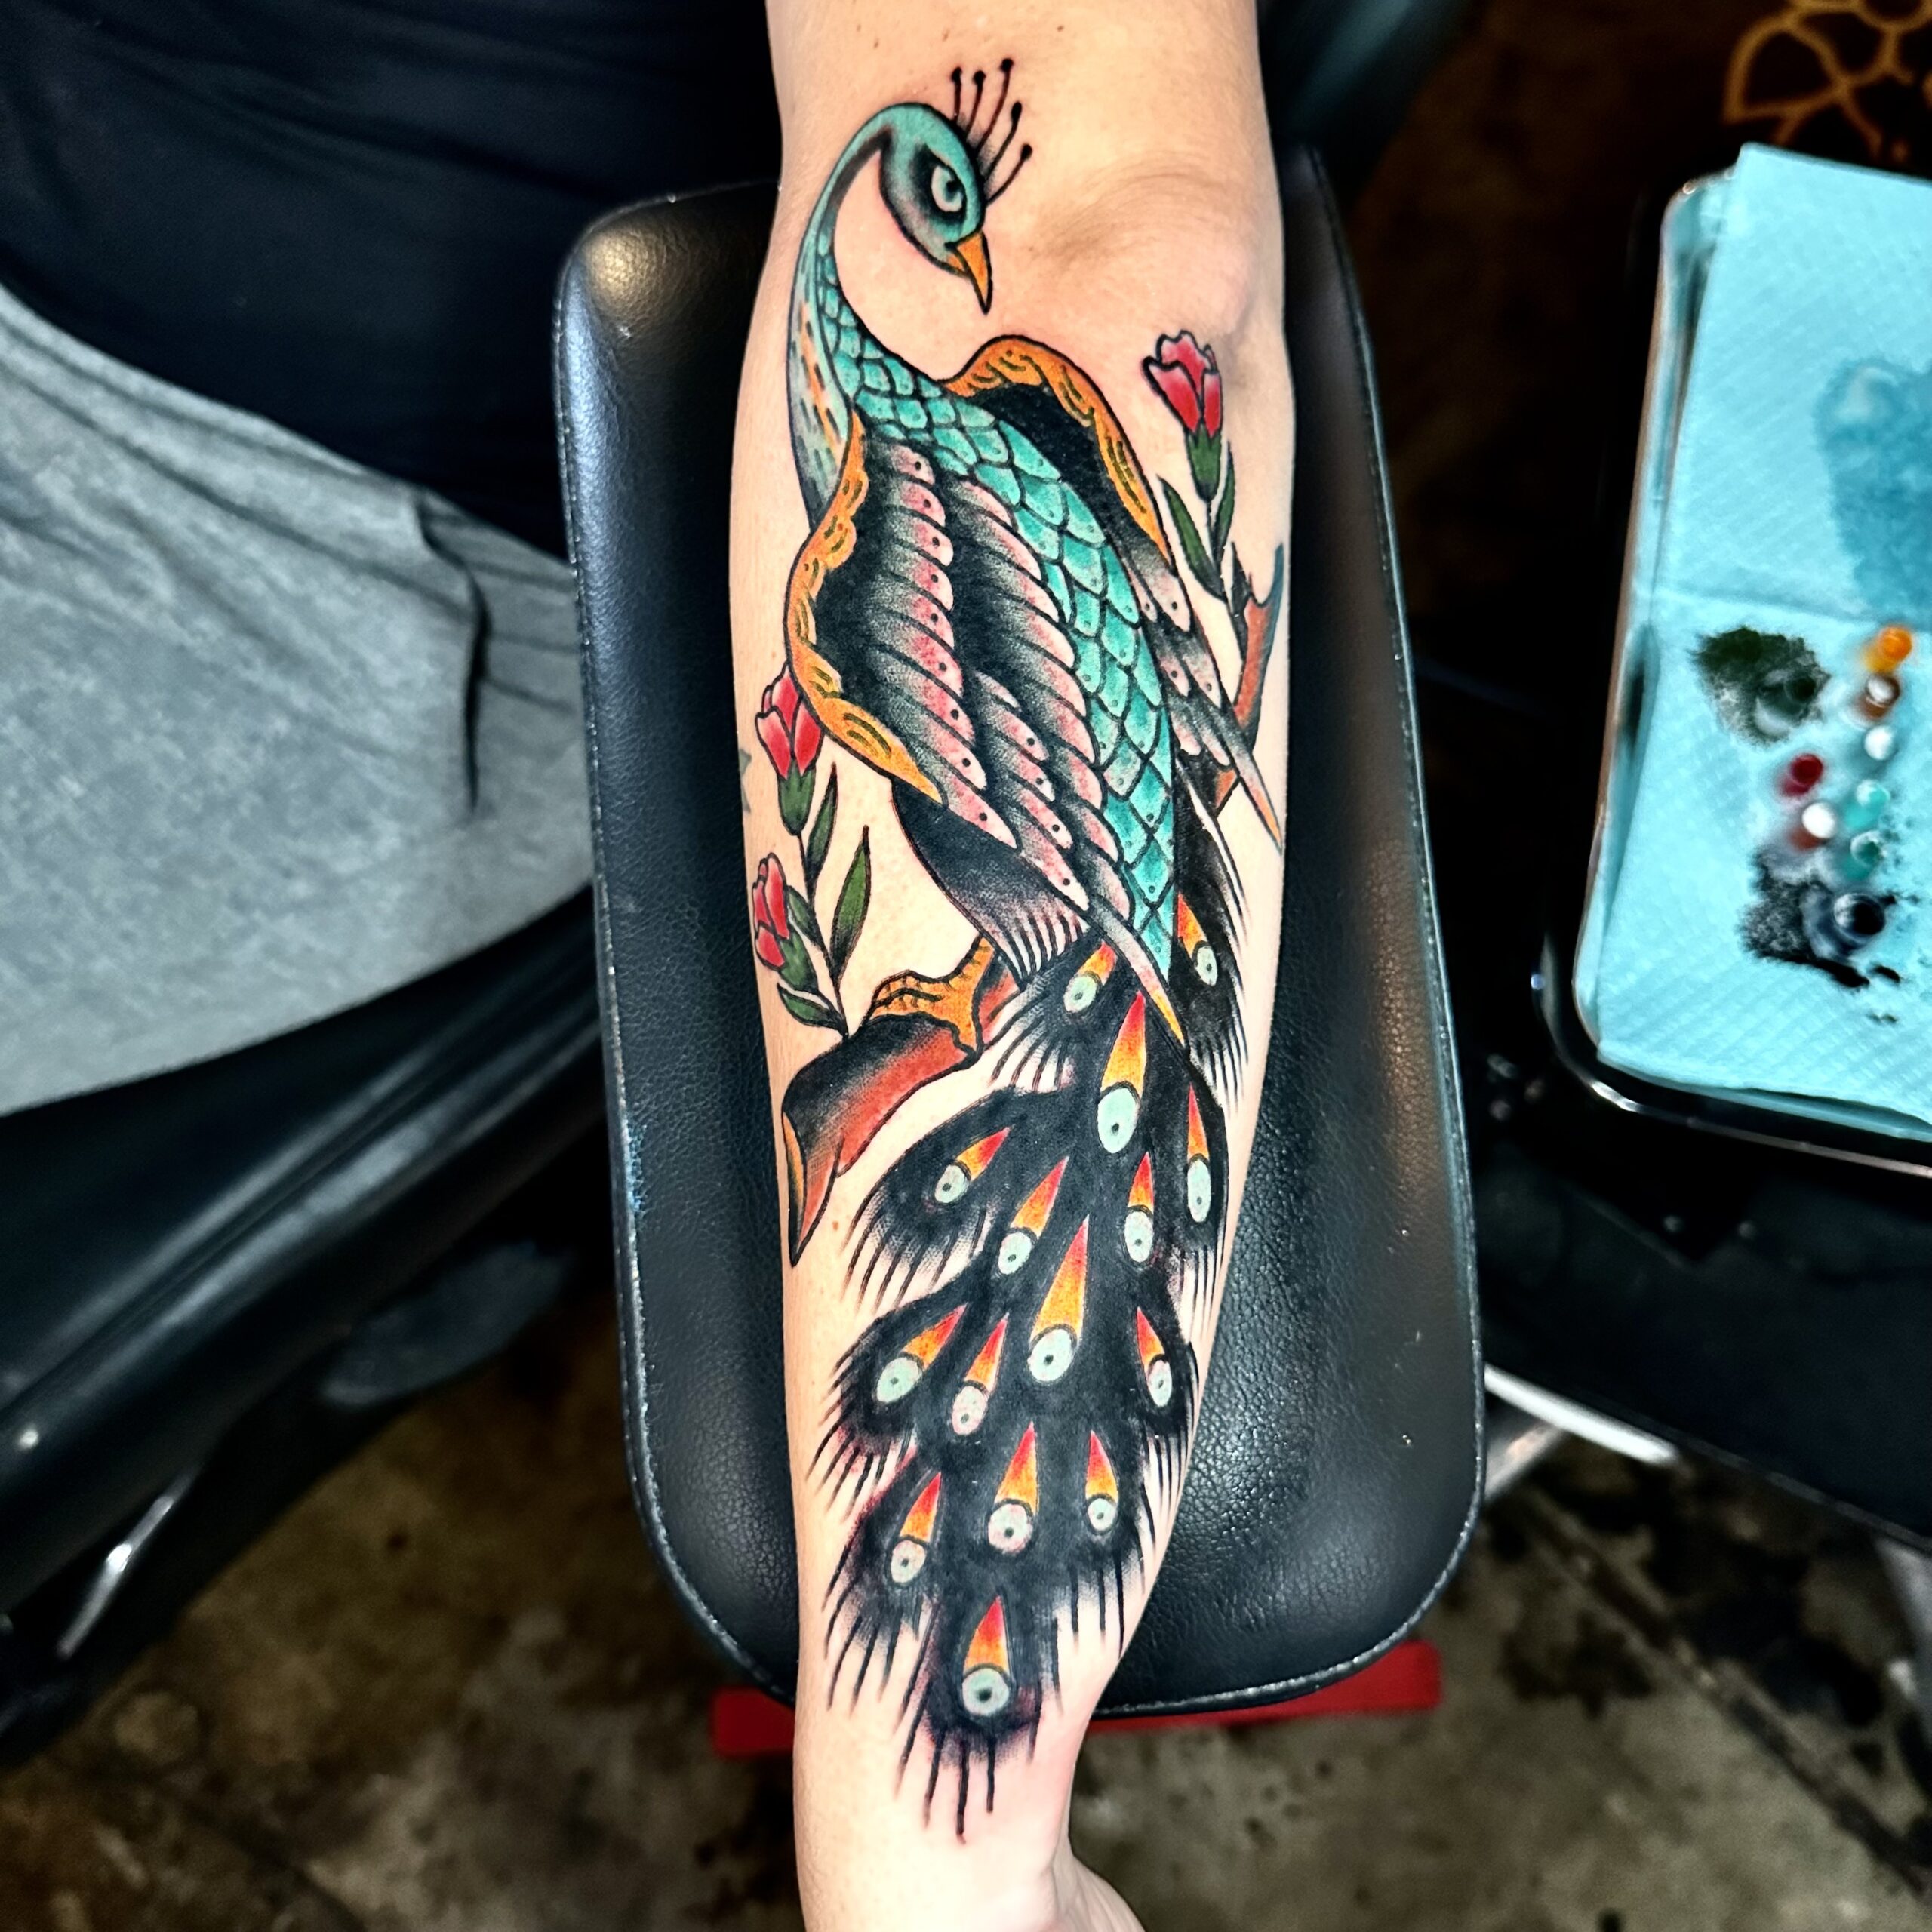 Tattoo of a peacock from top Dallas Tattoo artist